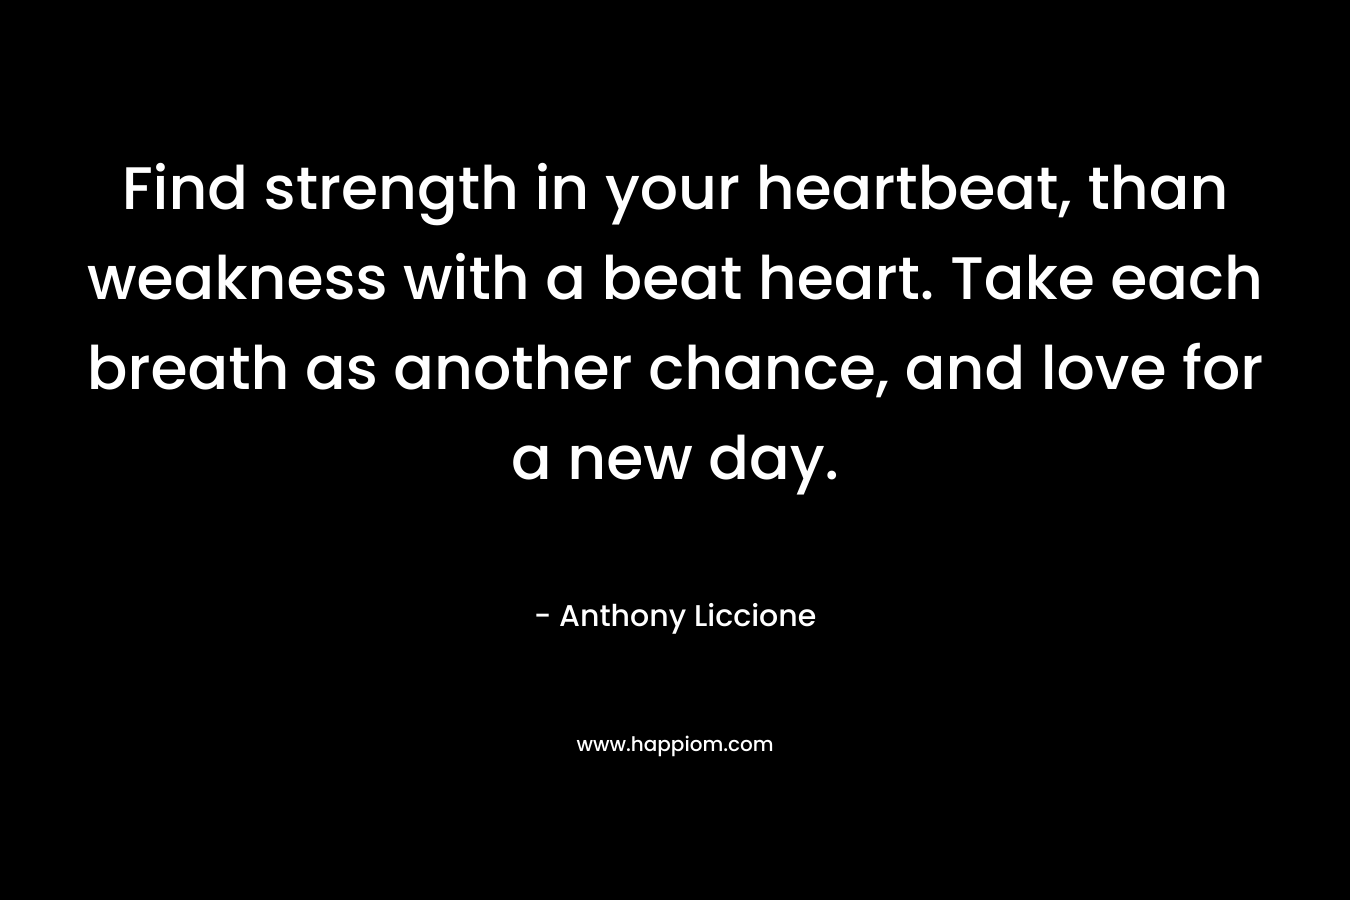 Find strength in your heartbeat, than weakness with a beat heart. Take each breath as another chance, and love for a new day.